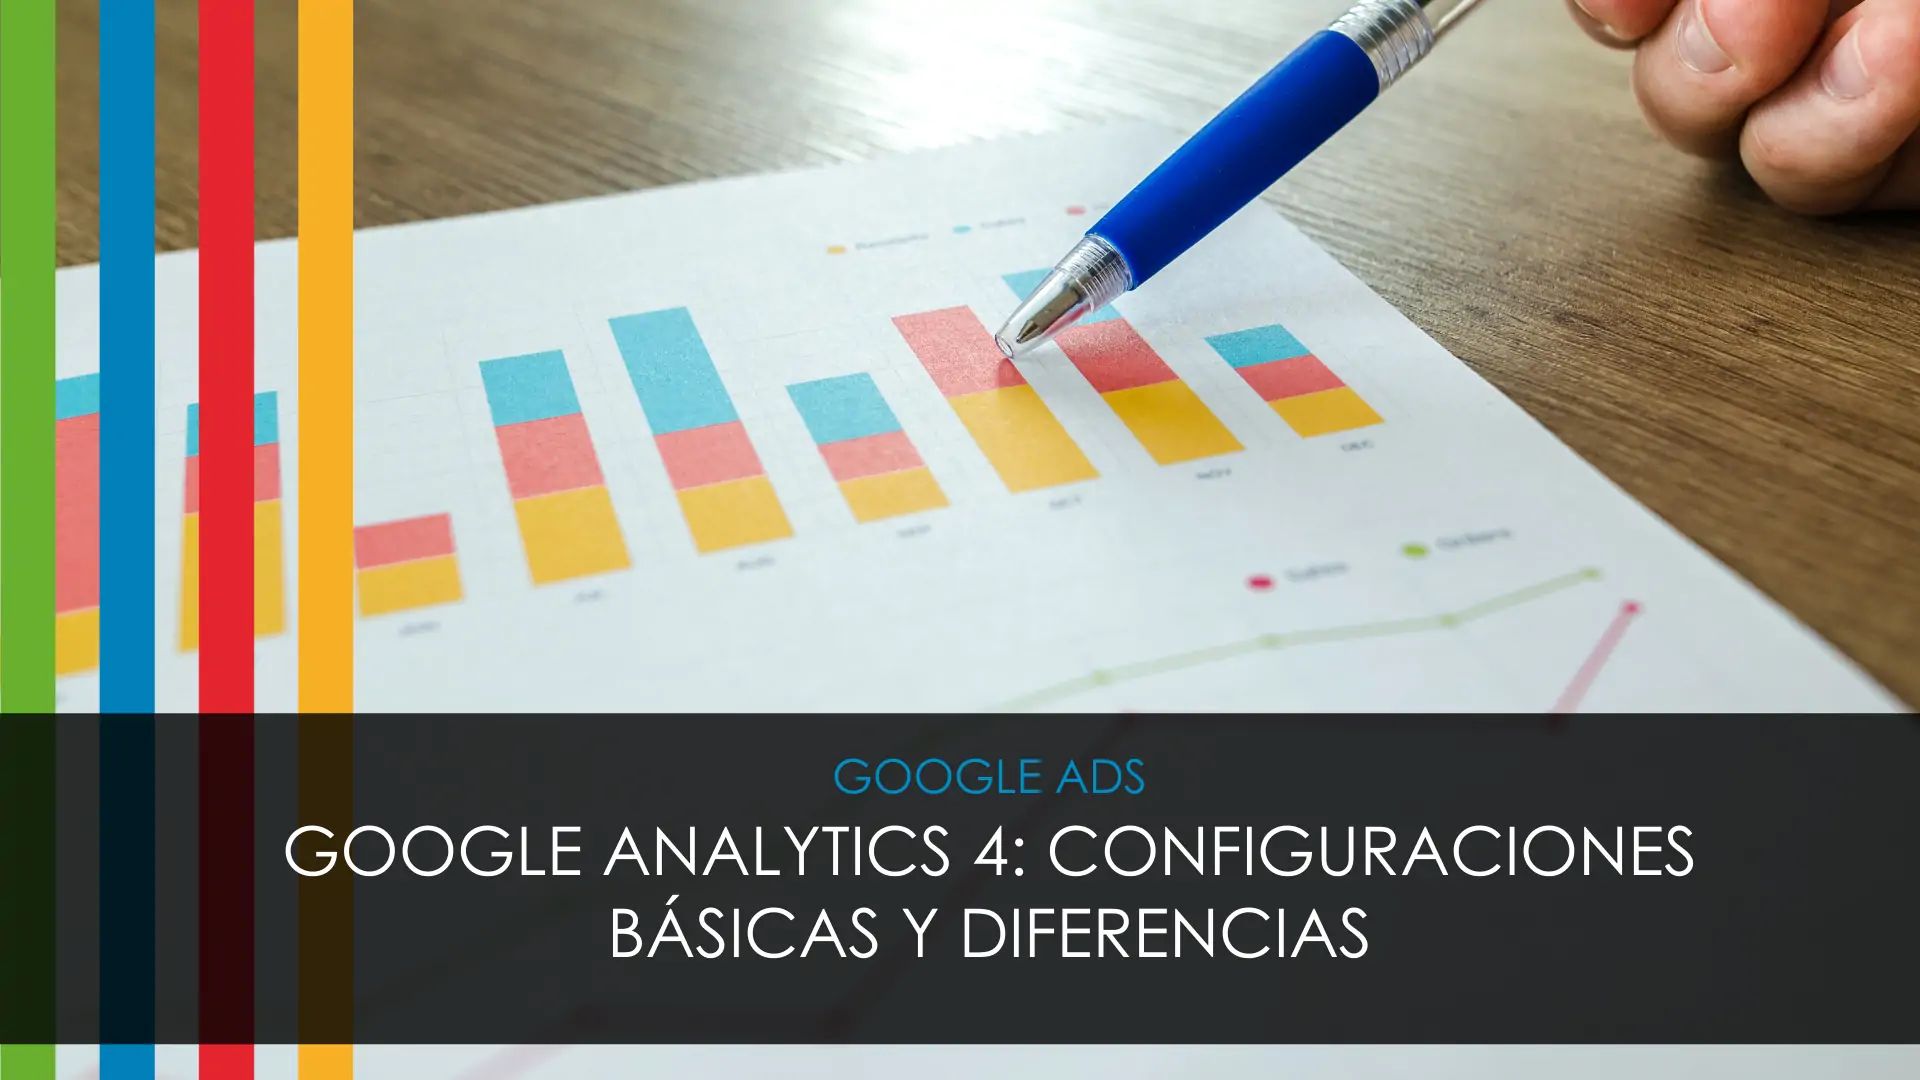 Google Analytics 4: Basic Settings and Differences